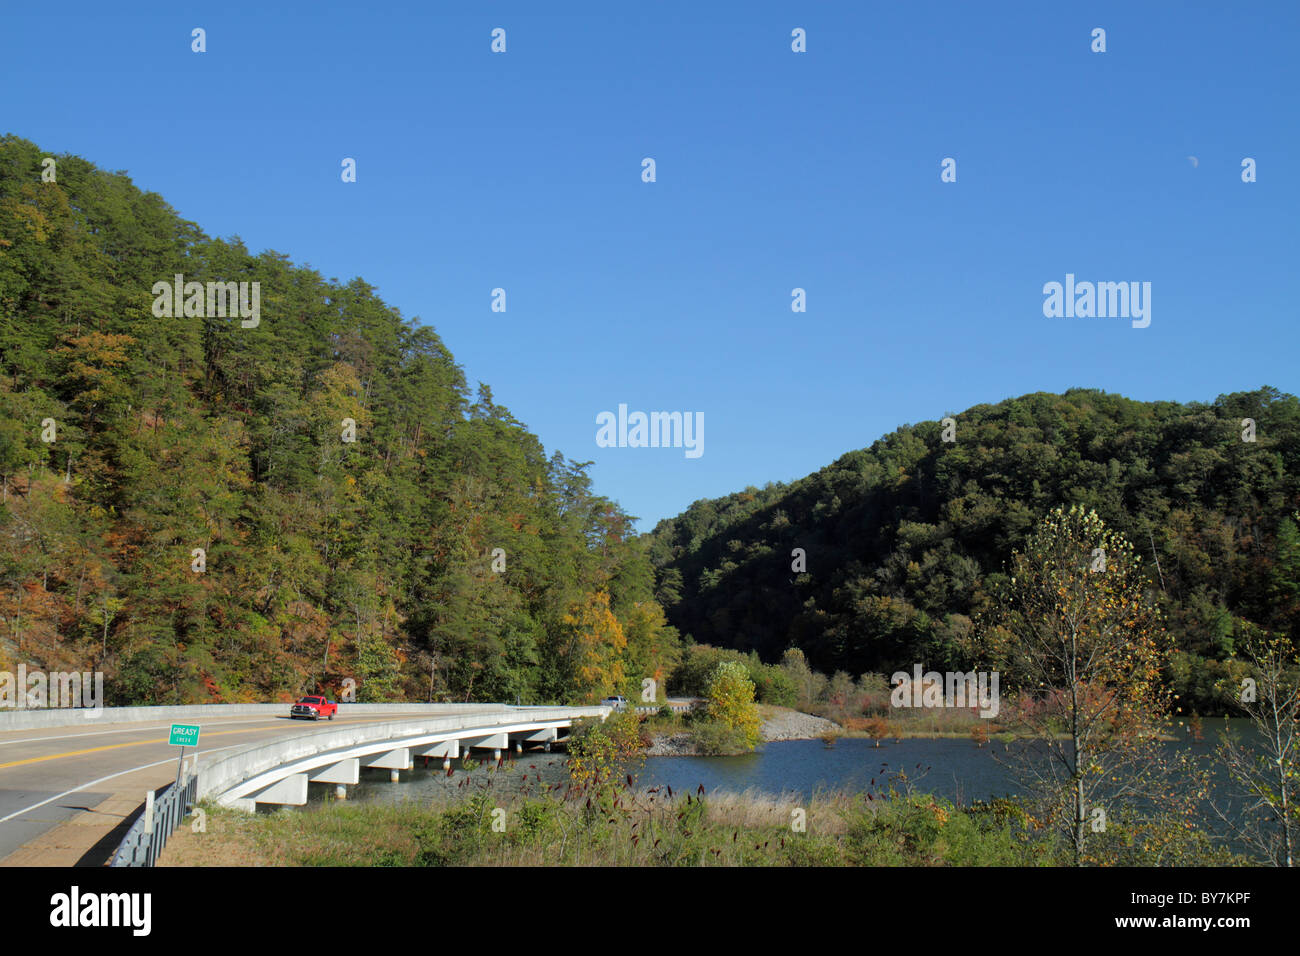 Tennessee,TN,South,Cherokee National Forest,Greasy Creek water,Department of Agriculture,federal land,trees,managed resource,bridge,roadway,blue sky,r Stock Photo